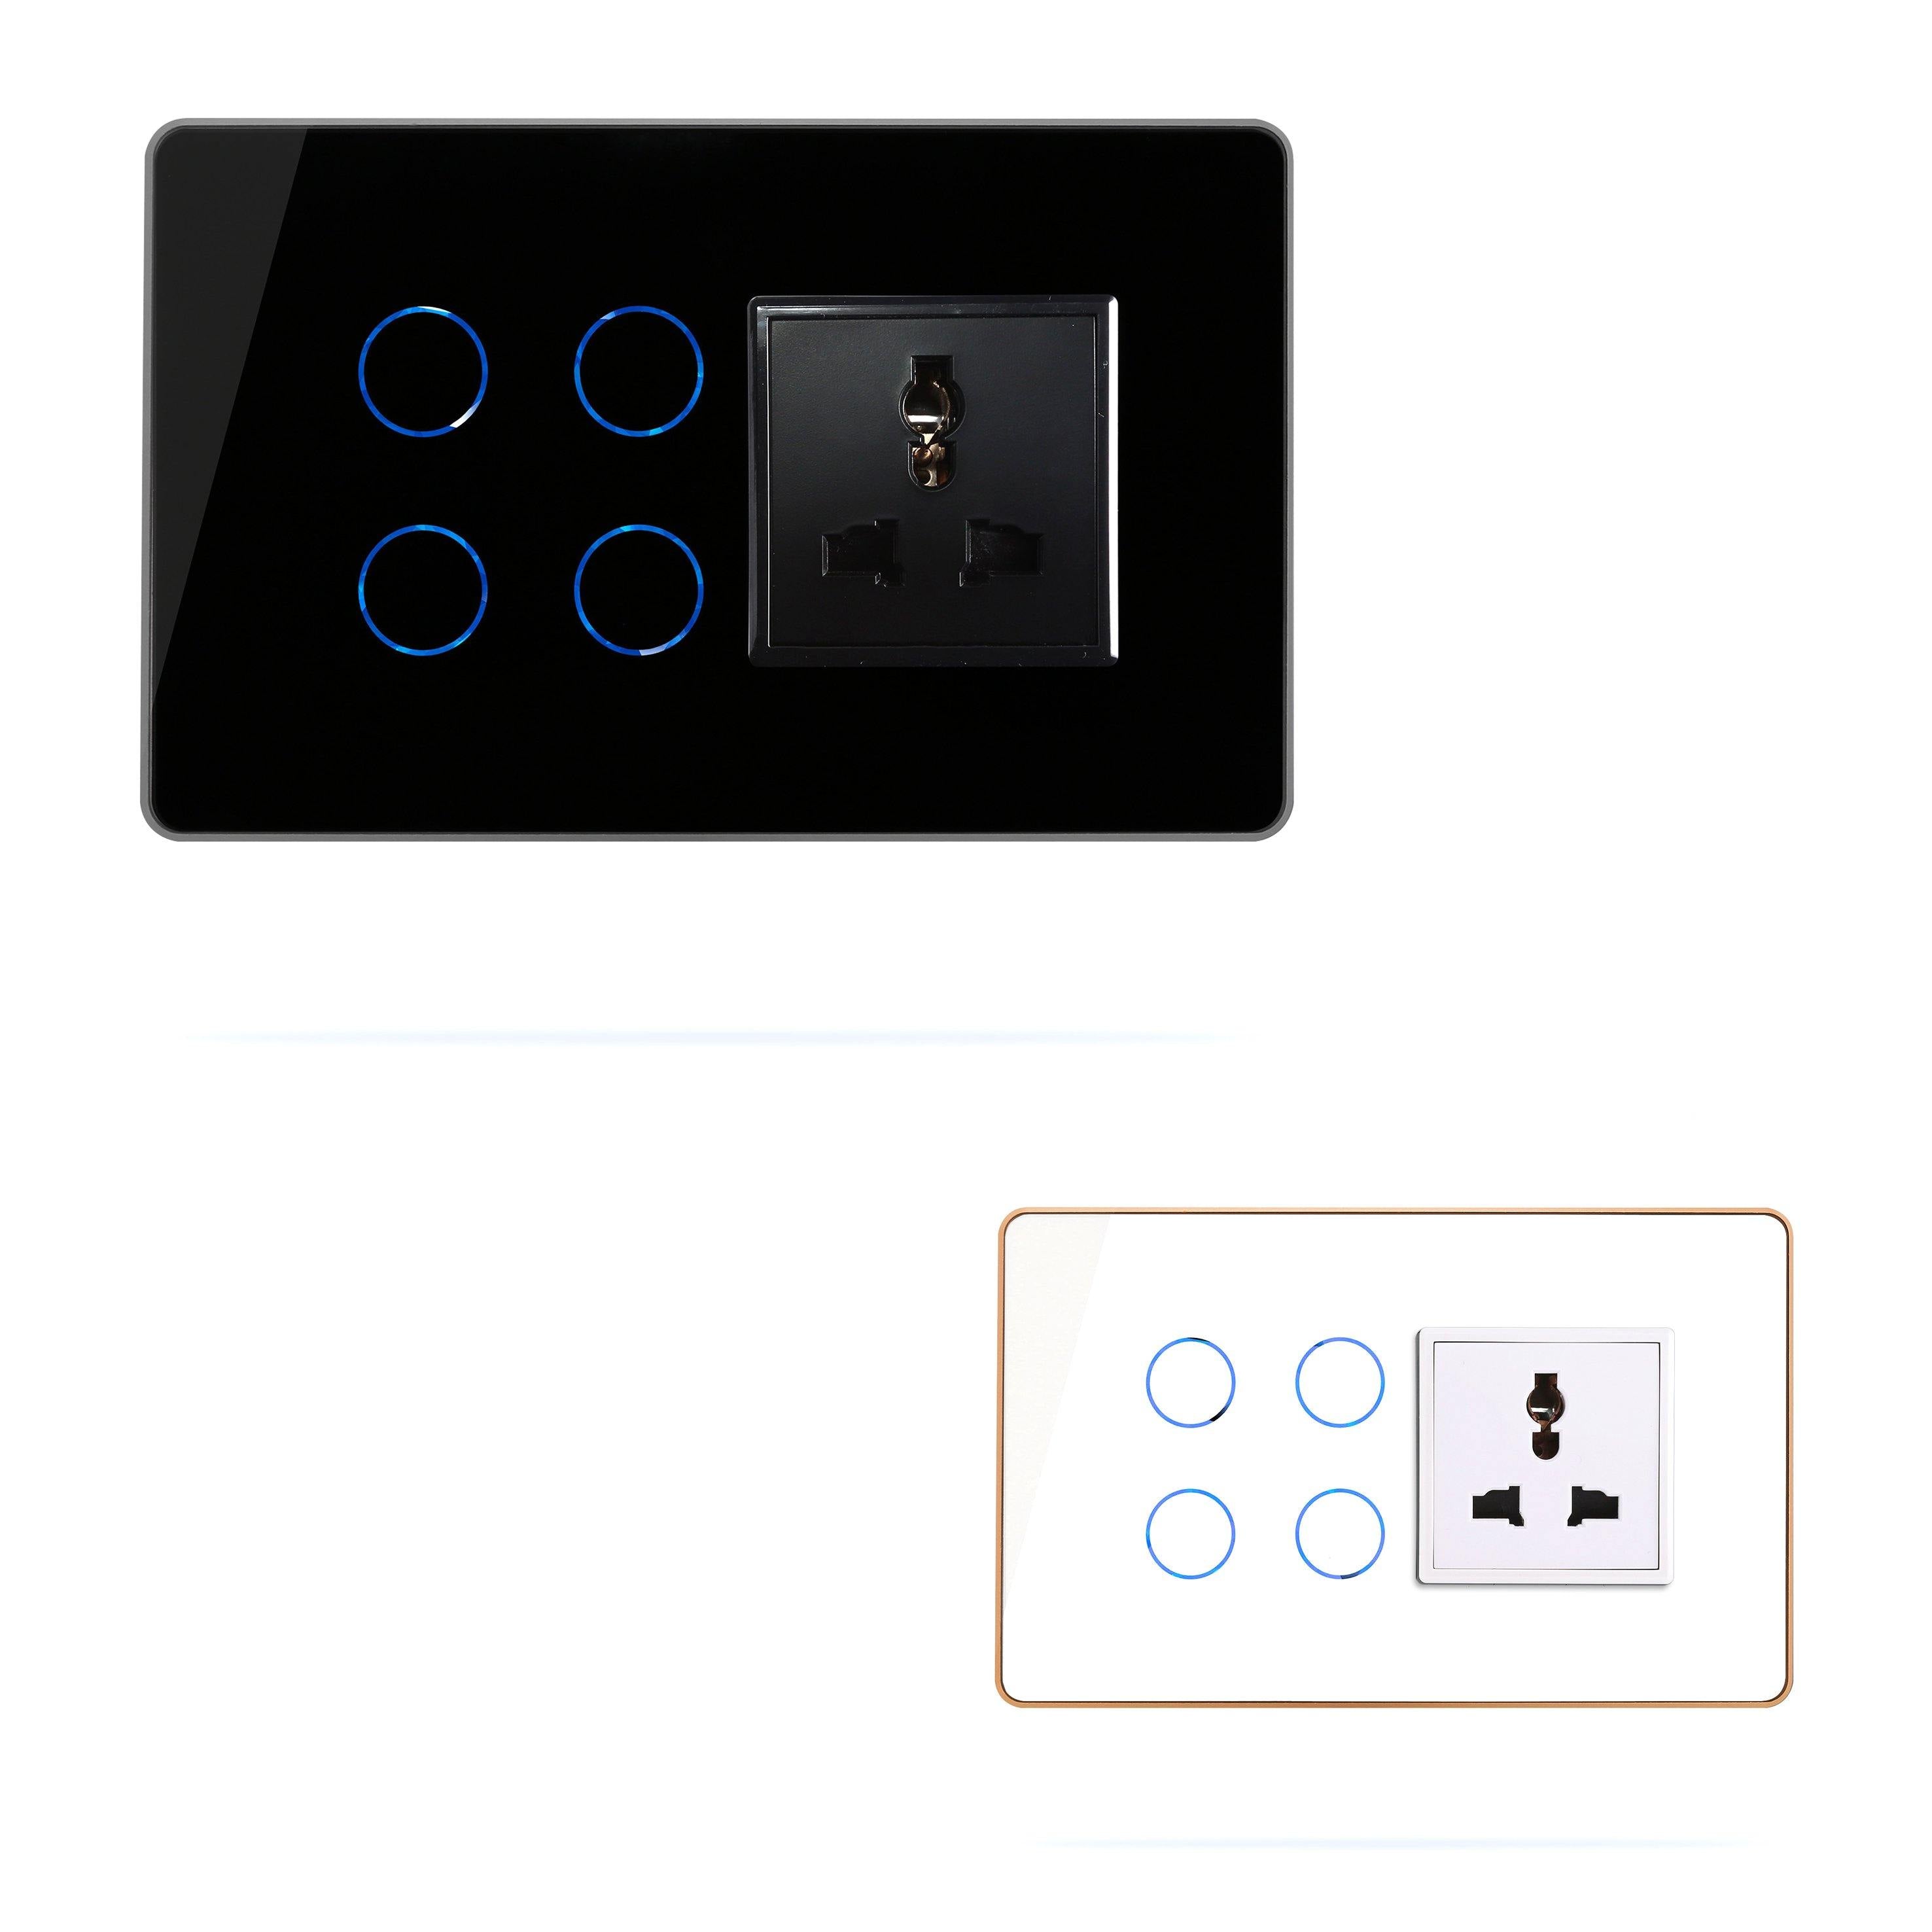 HOGAR SMART 4+1 TOUCH SWITCH PANELS WITH BUILT-IN AUTOMATION - Ankur Lighting